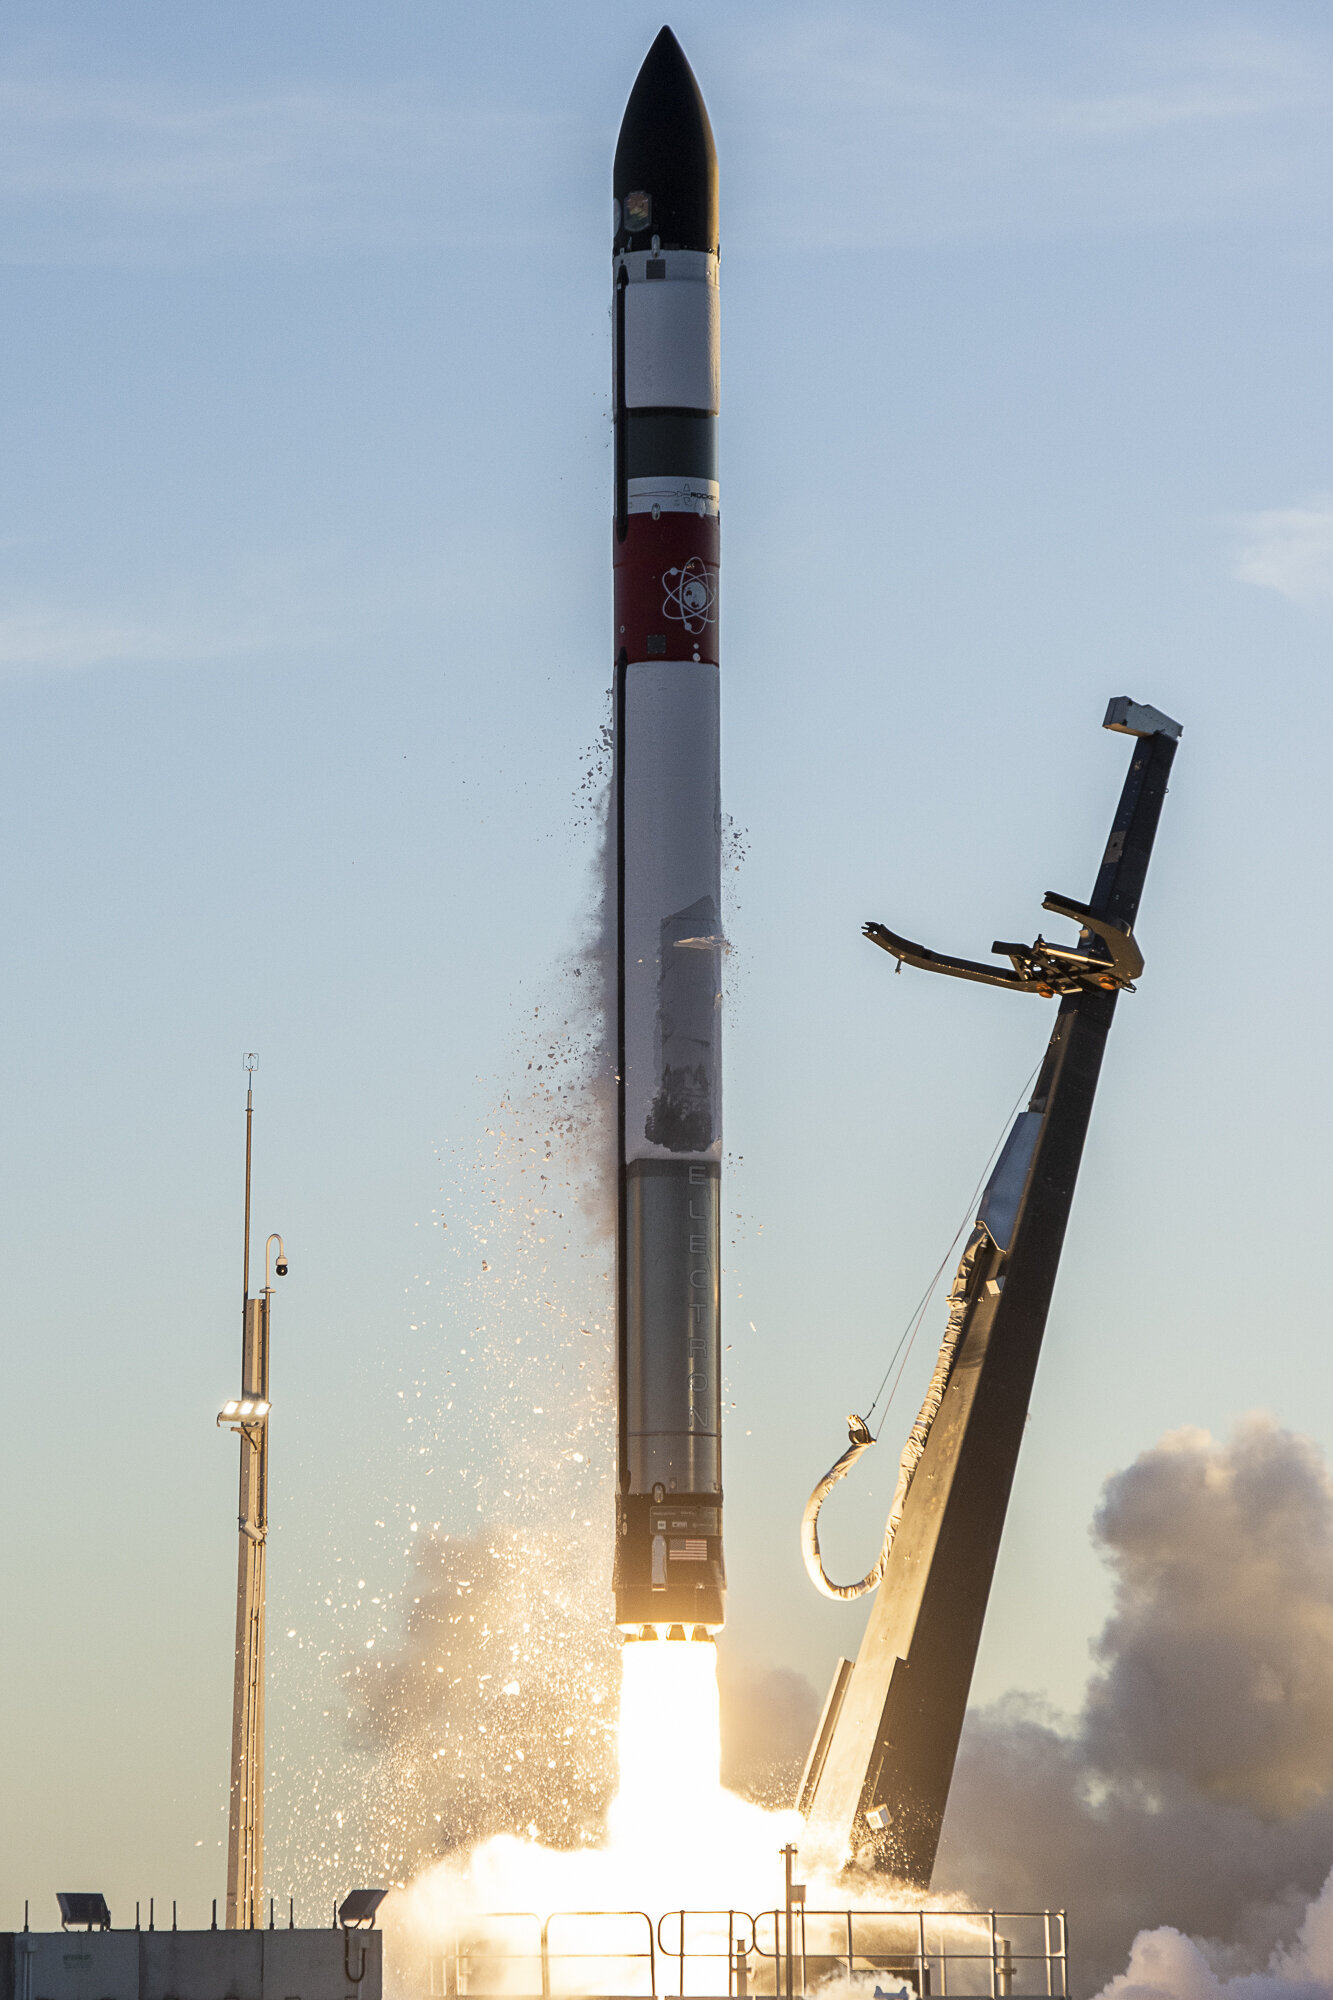 Rocket Lab's Electron rocket launching. Leaving the launch pad. Pad alight from engine fire.